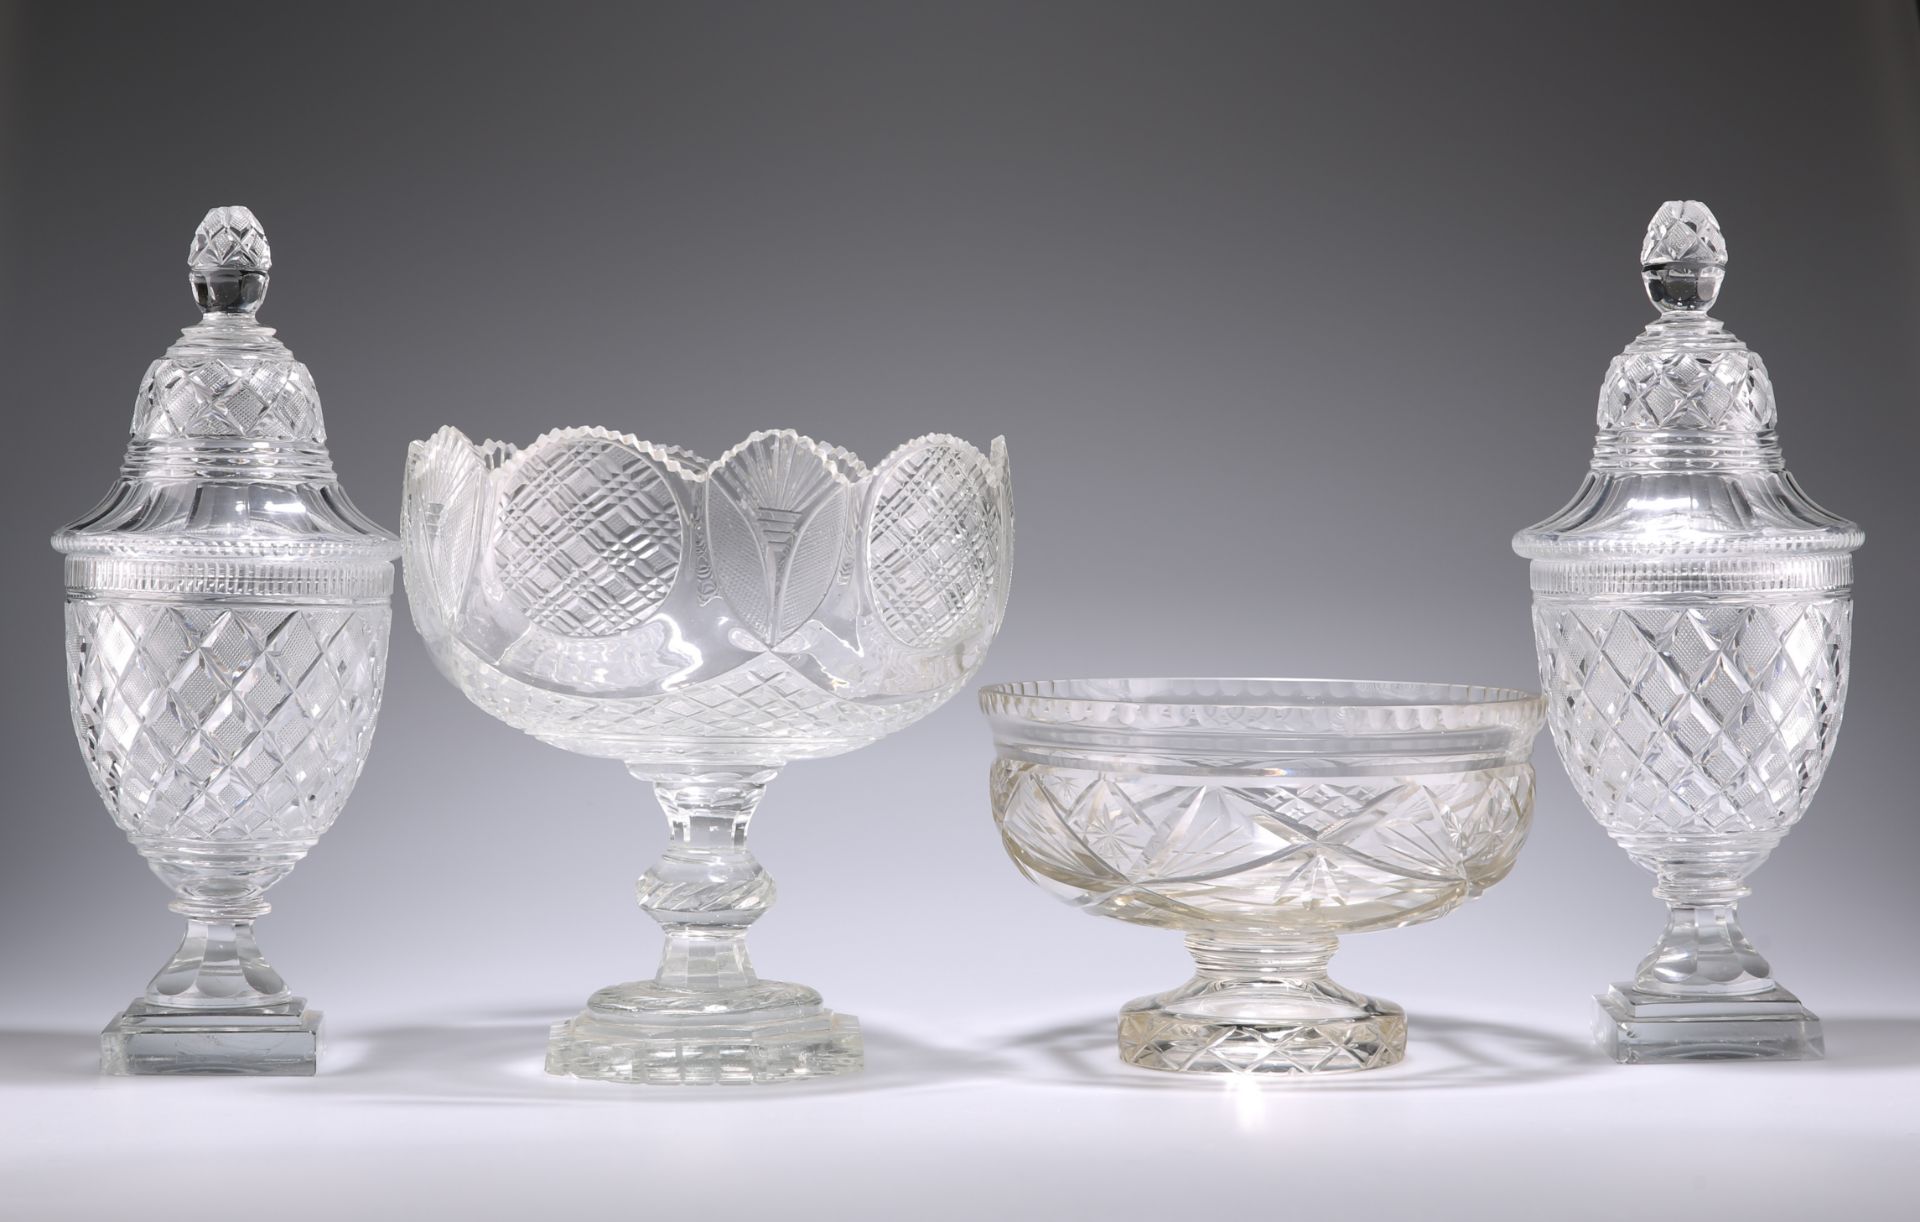 A PAIR OF EARLY 19TH CENTURY CUT-GLASS URNS AND COVERS